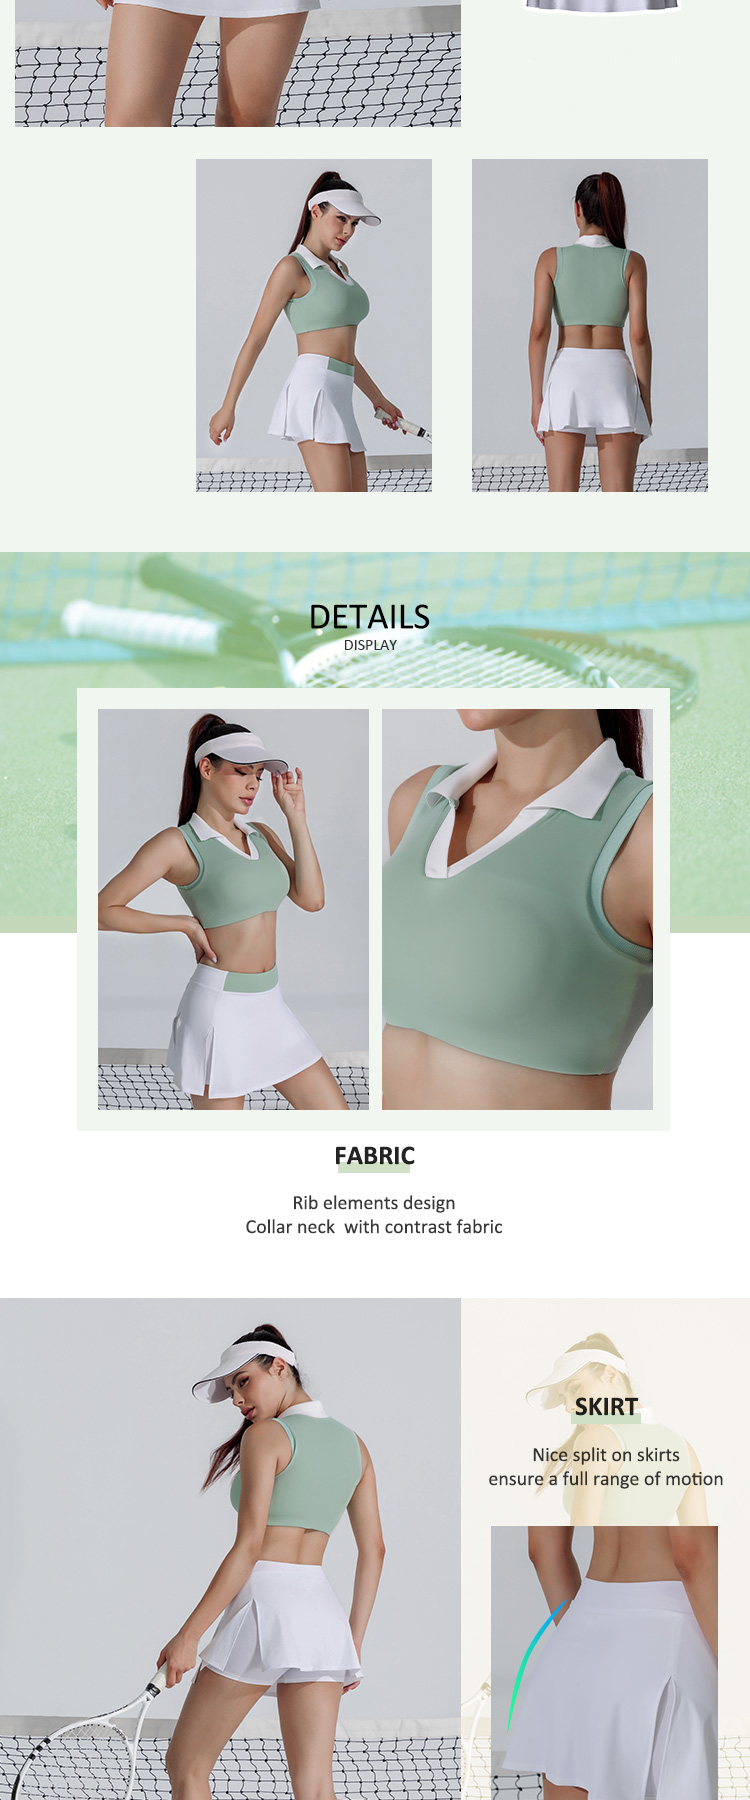 INGOR woman tennis wear production at the gym-3